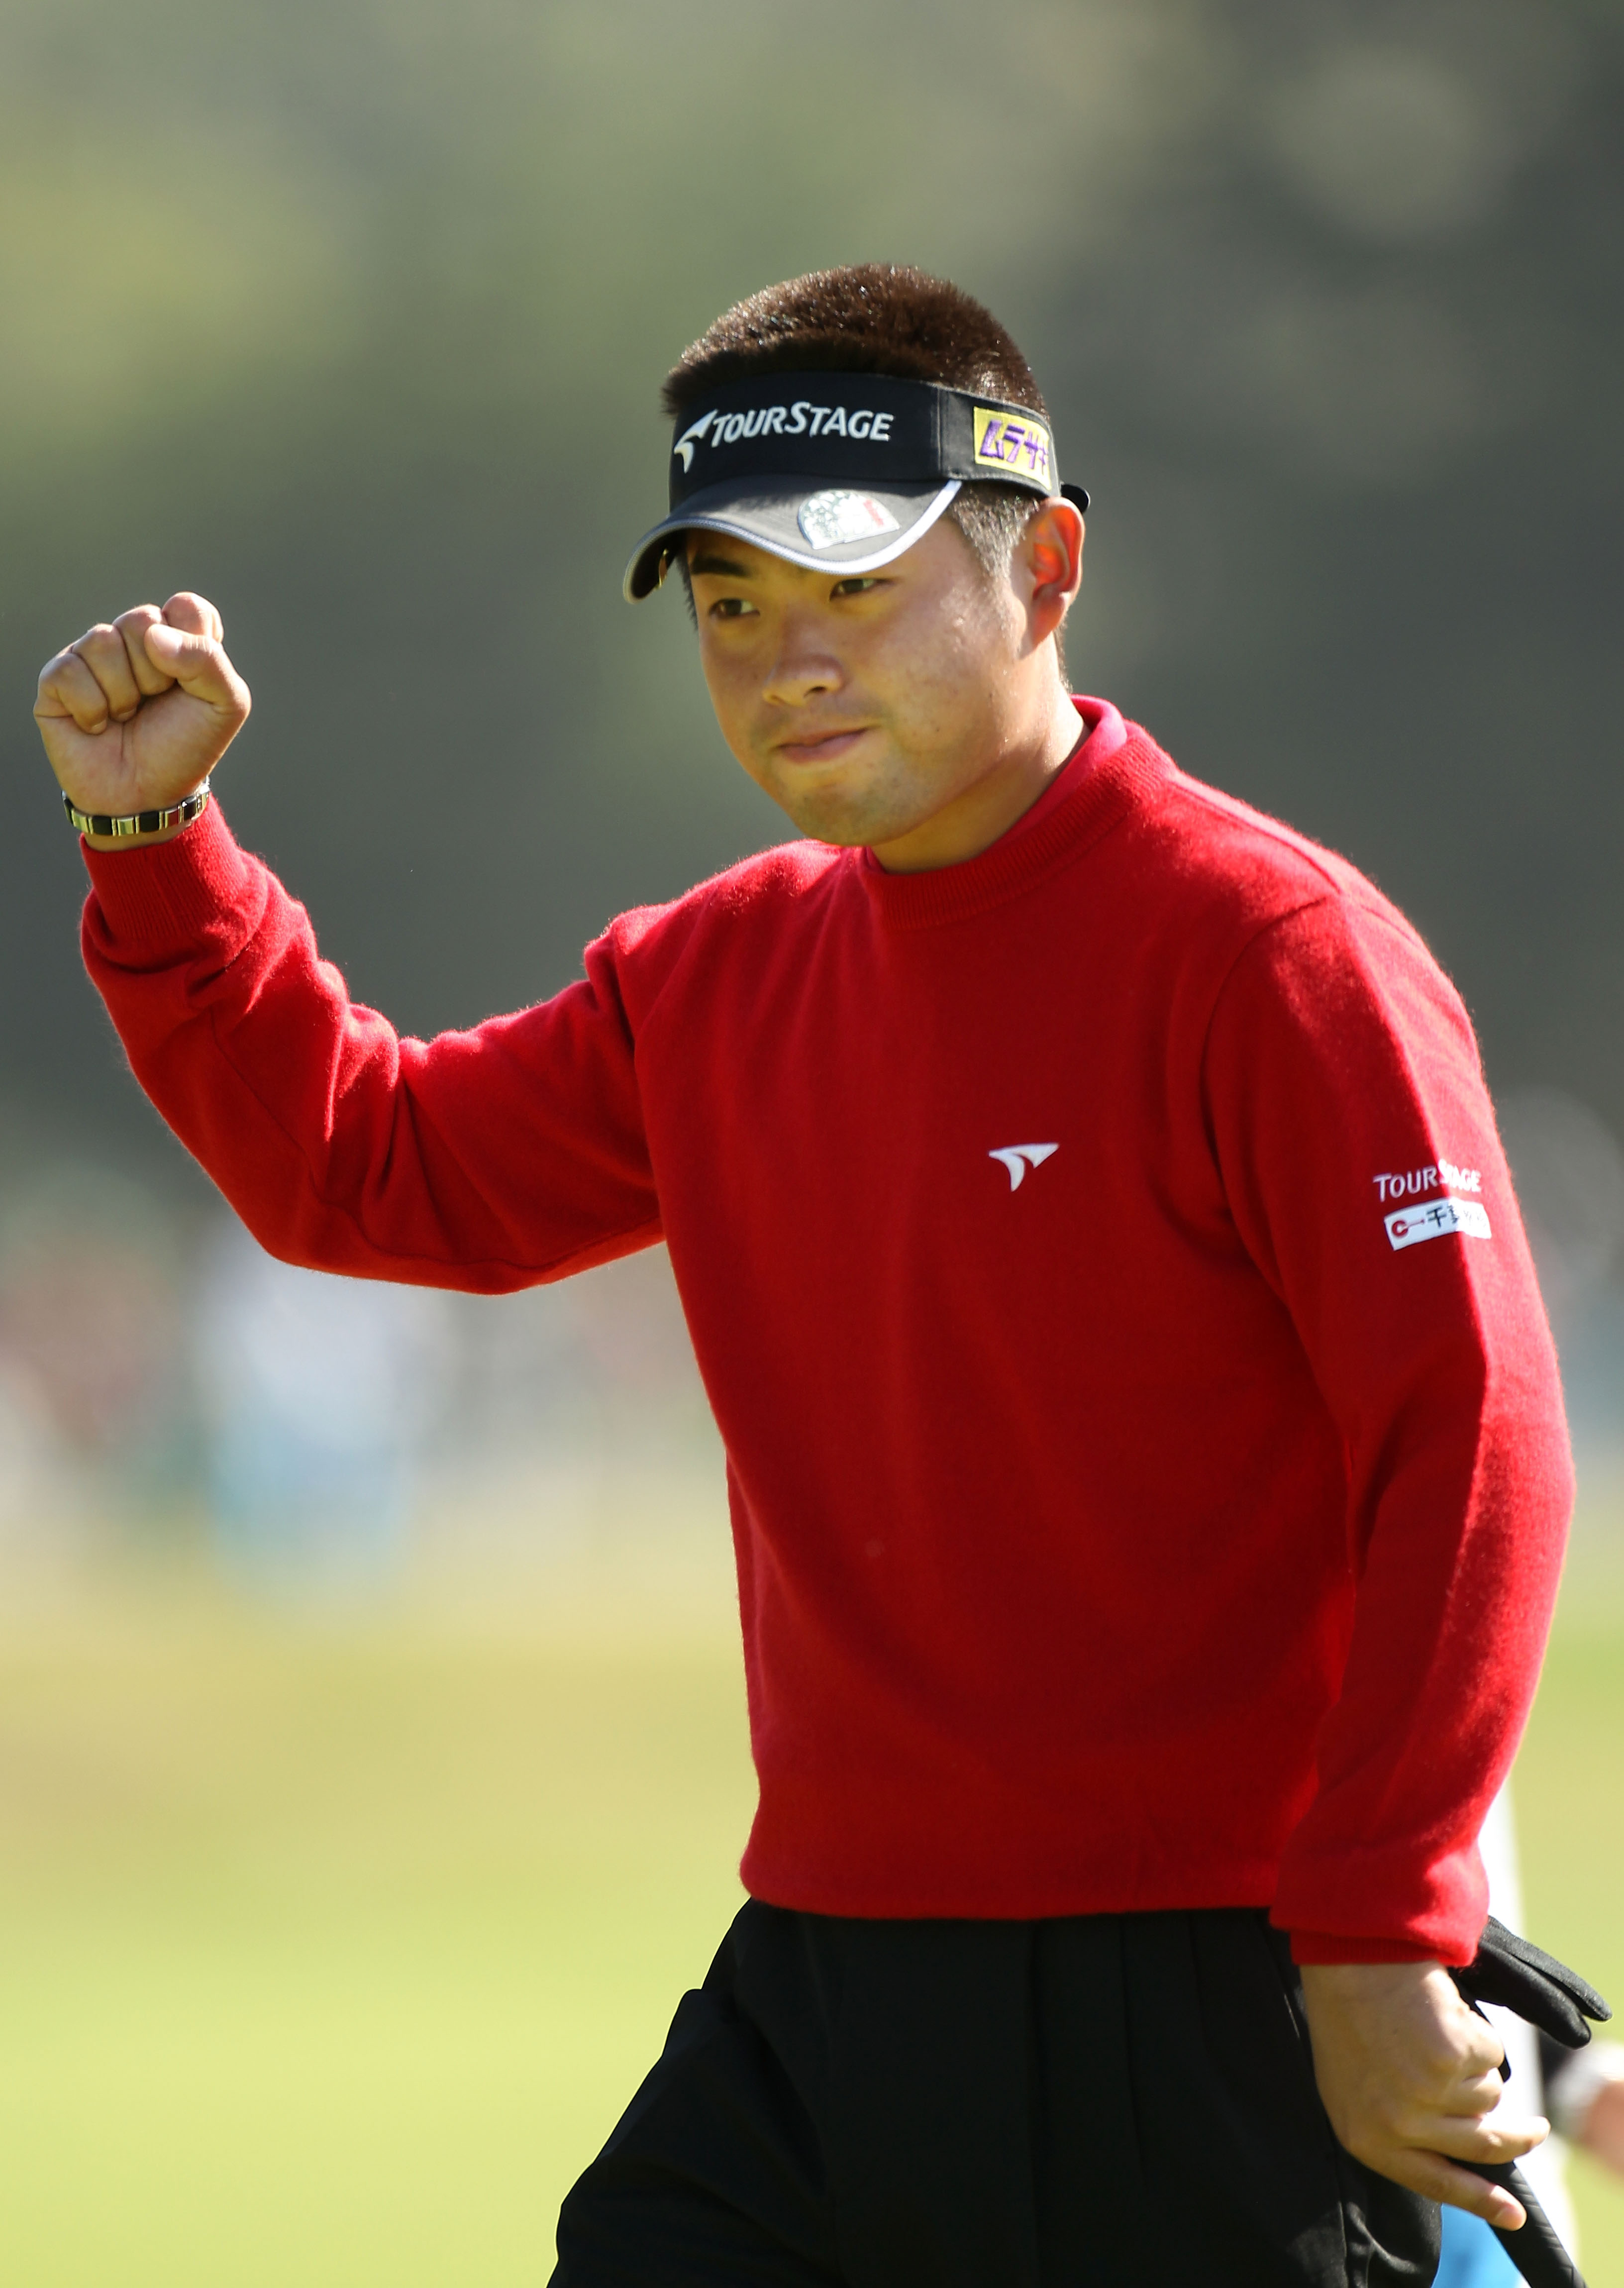 PEBBLE BEACH, CA - JUNE 17:  Yuta Ikeda of Japan  celebrates a birdie putt on the third green during the first round of the 110th U.S. Open at Pebble Beach Golf Links on June 17, 2010 in Pebble Beach, California.  (Photo by Ross Kinnaird/Getty Images)